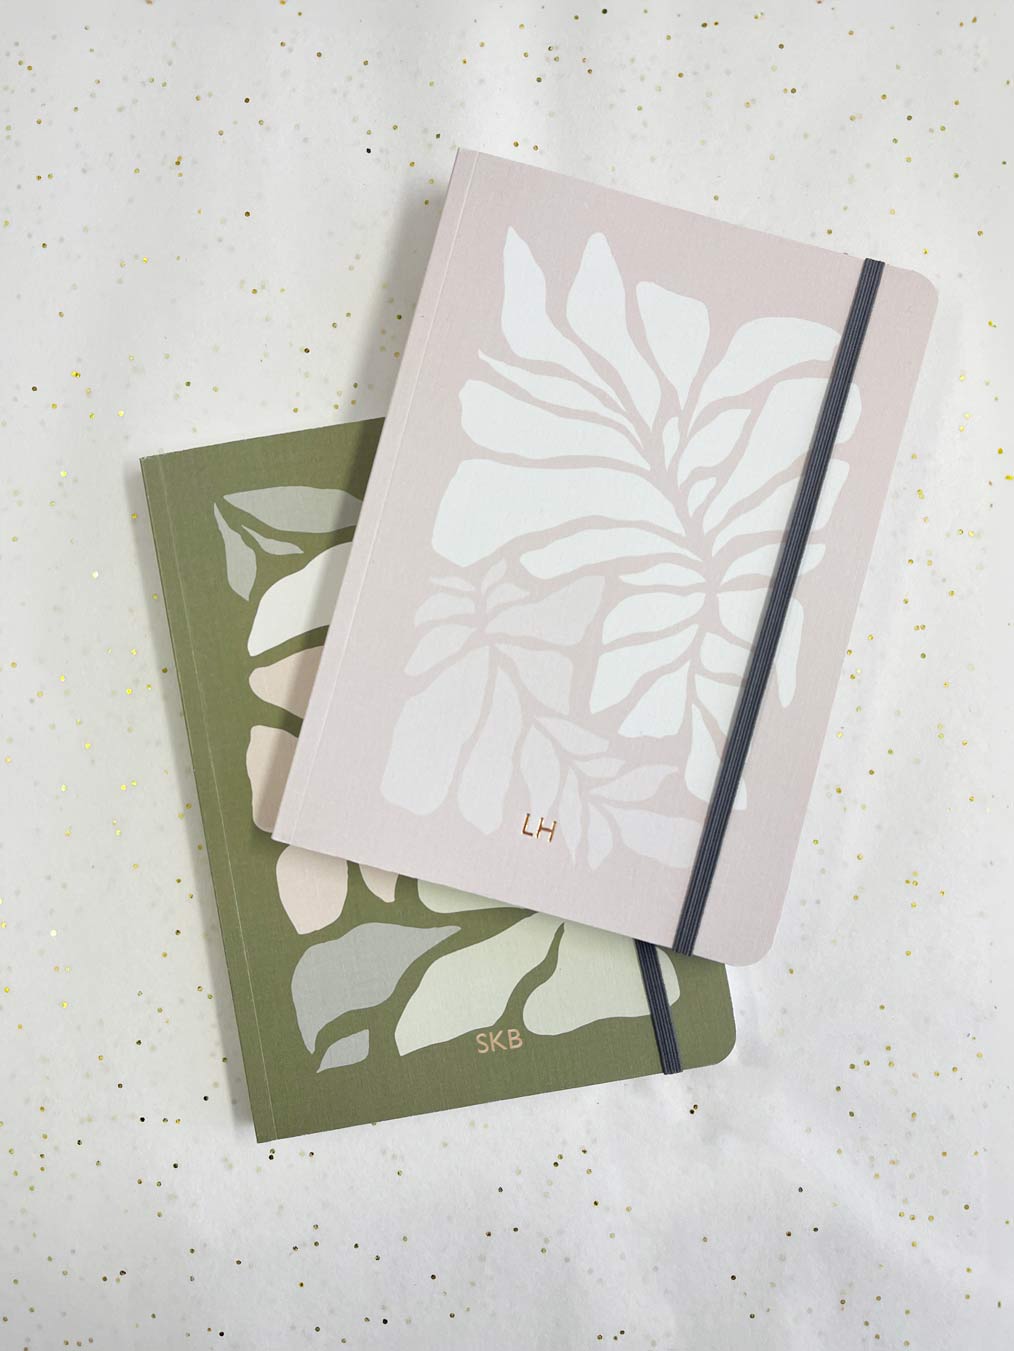 Pink 'Linen' Cover Lined A5 Personalised Notebook